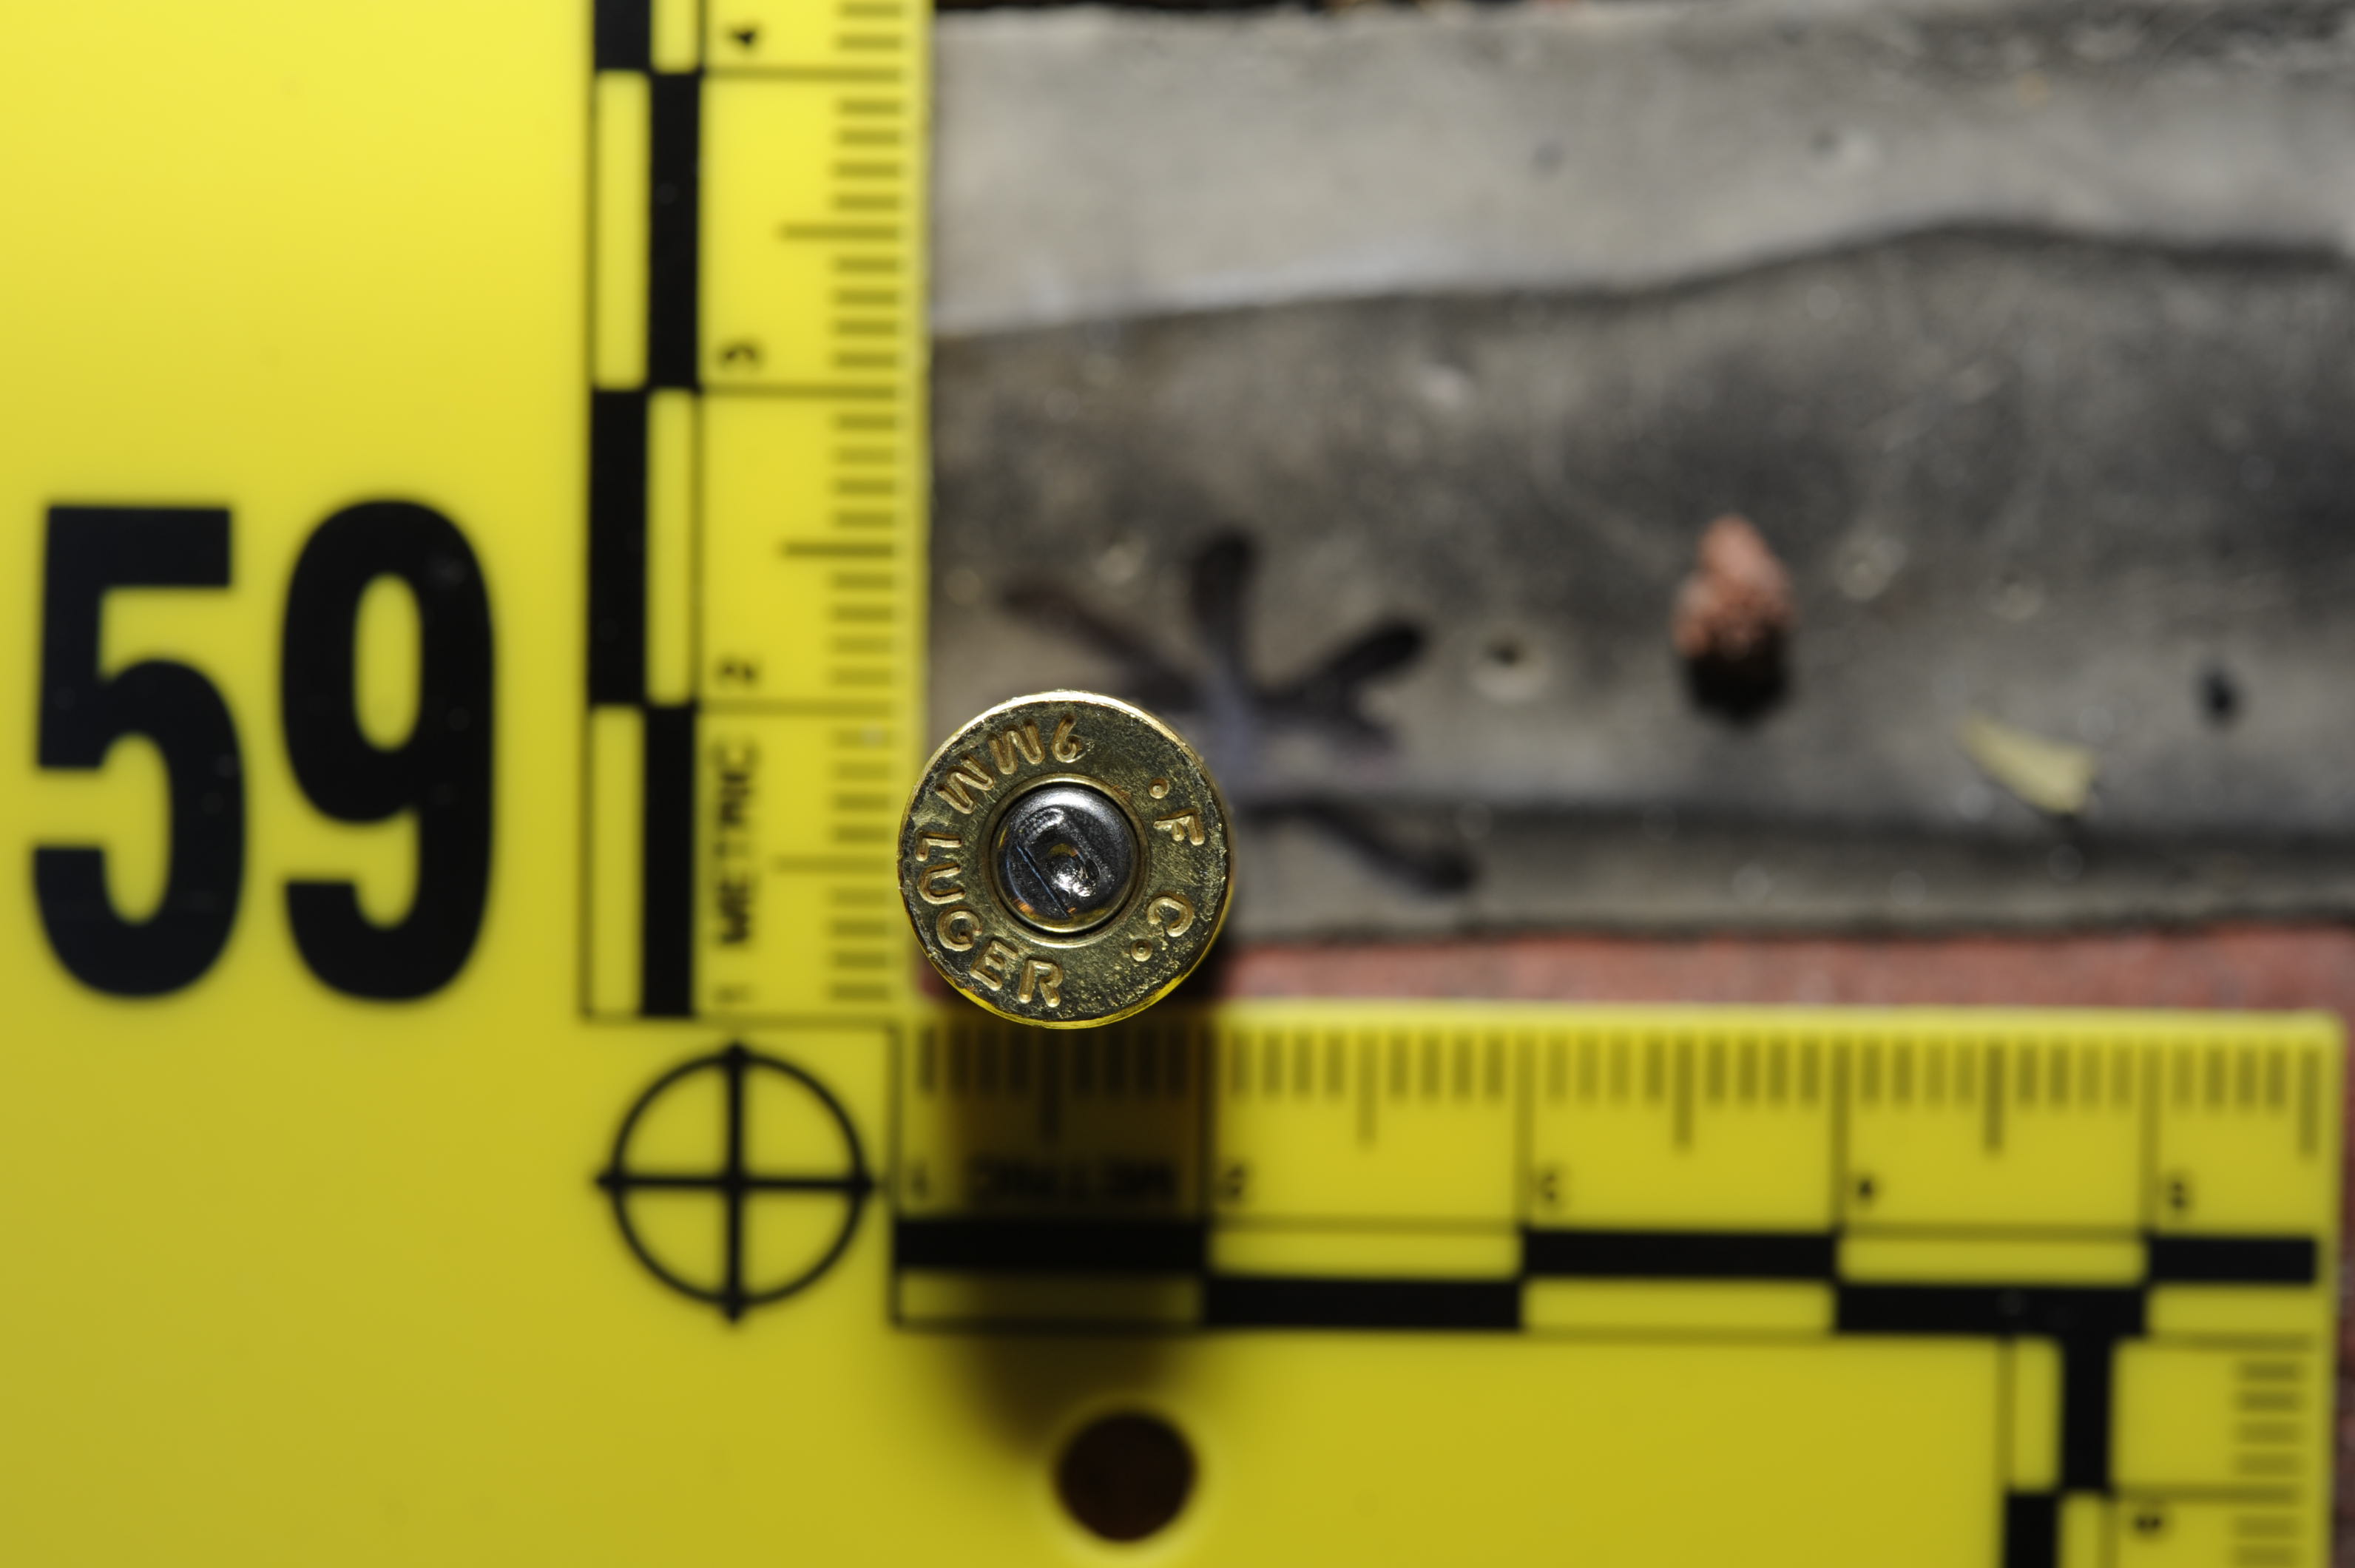 Fbi Records The Vault — 2011 Tucson Shooting Evidence Collected